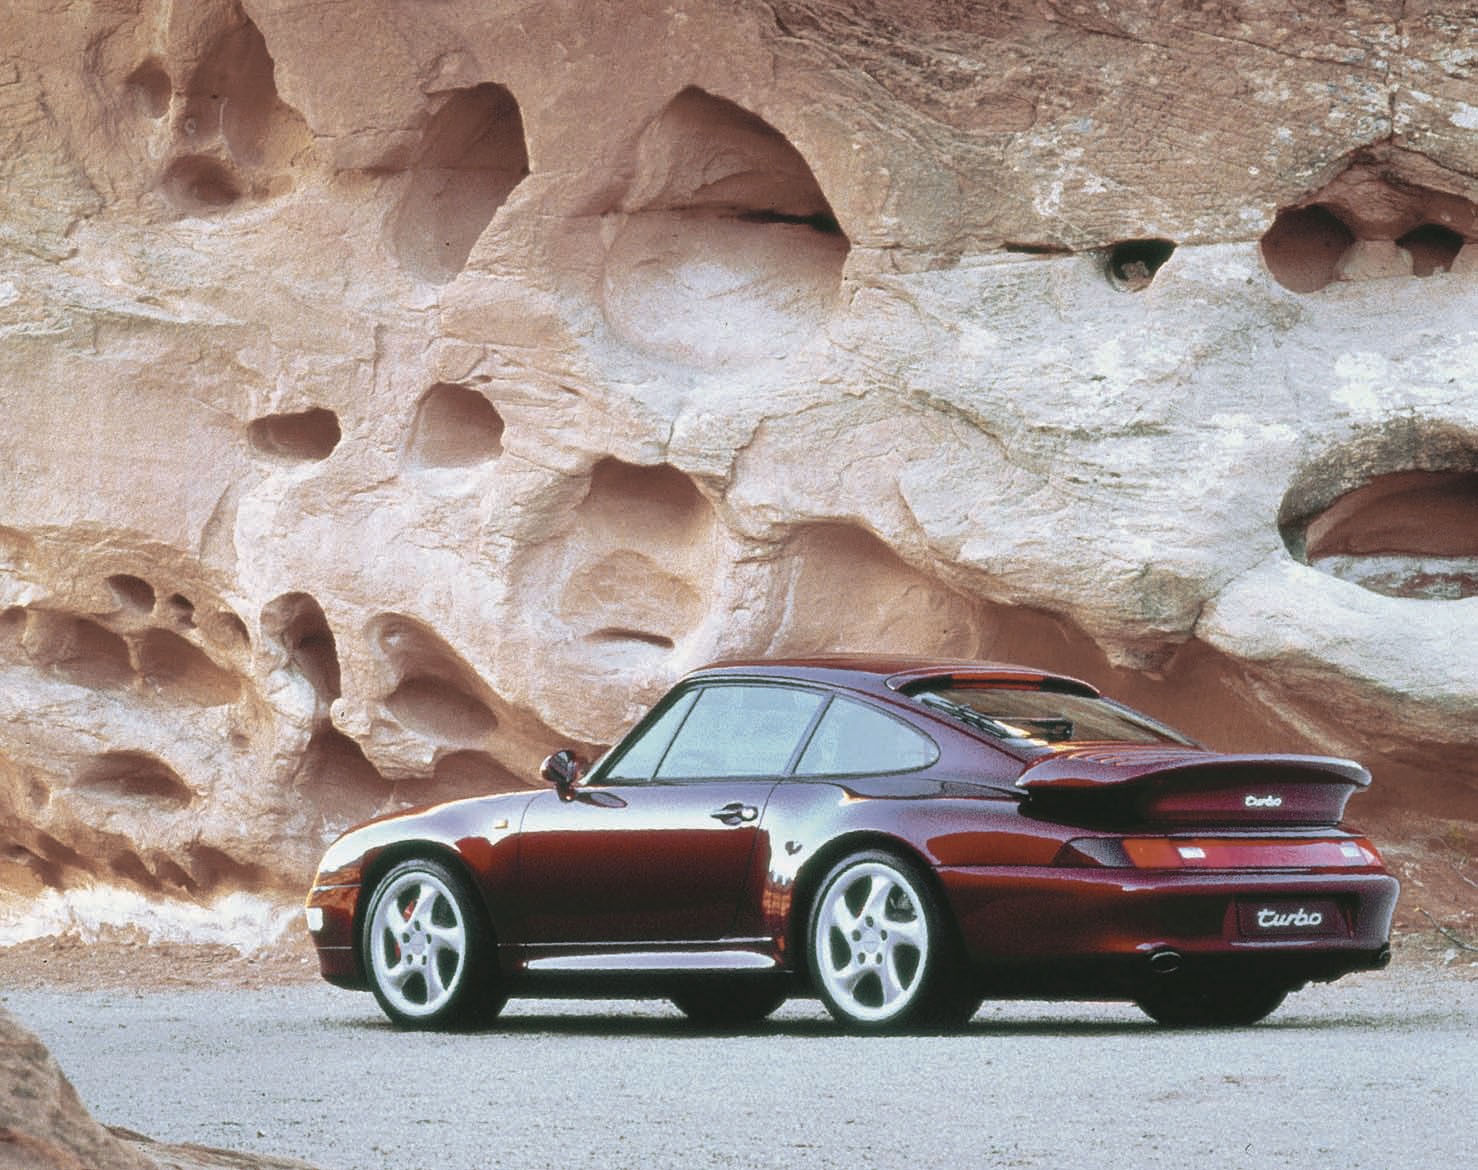 In March 1995, Porsche introduced the 993 Turbo at the Geneva Motor Show in Switzerland. It offered buyers 408 horsepower at 5,750 rpm. Porsche Archiv